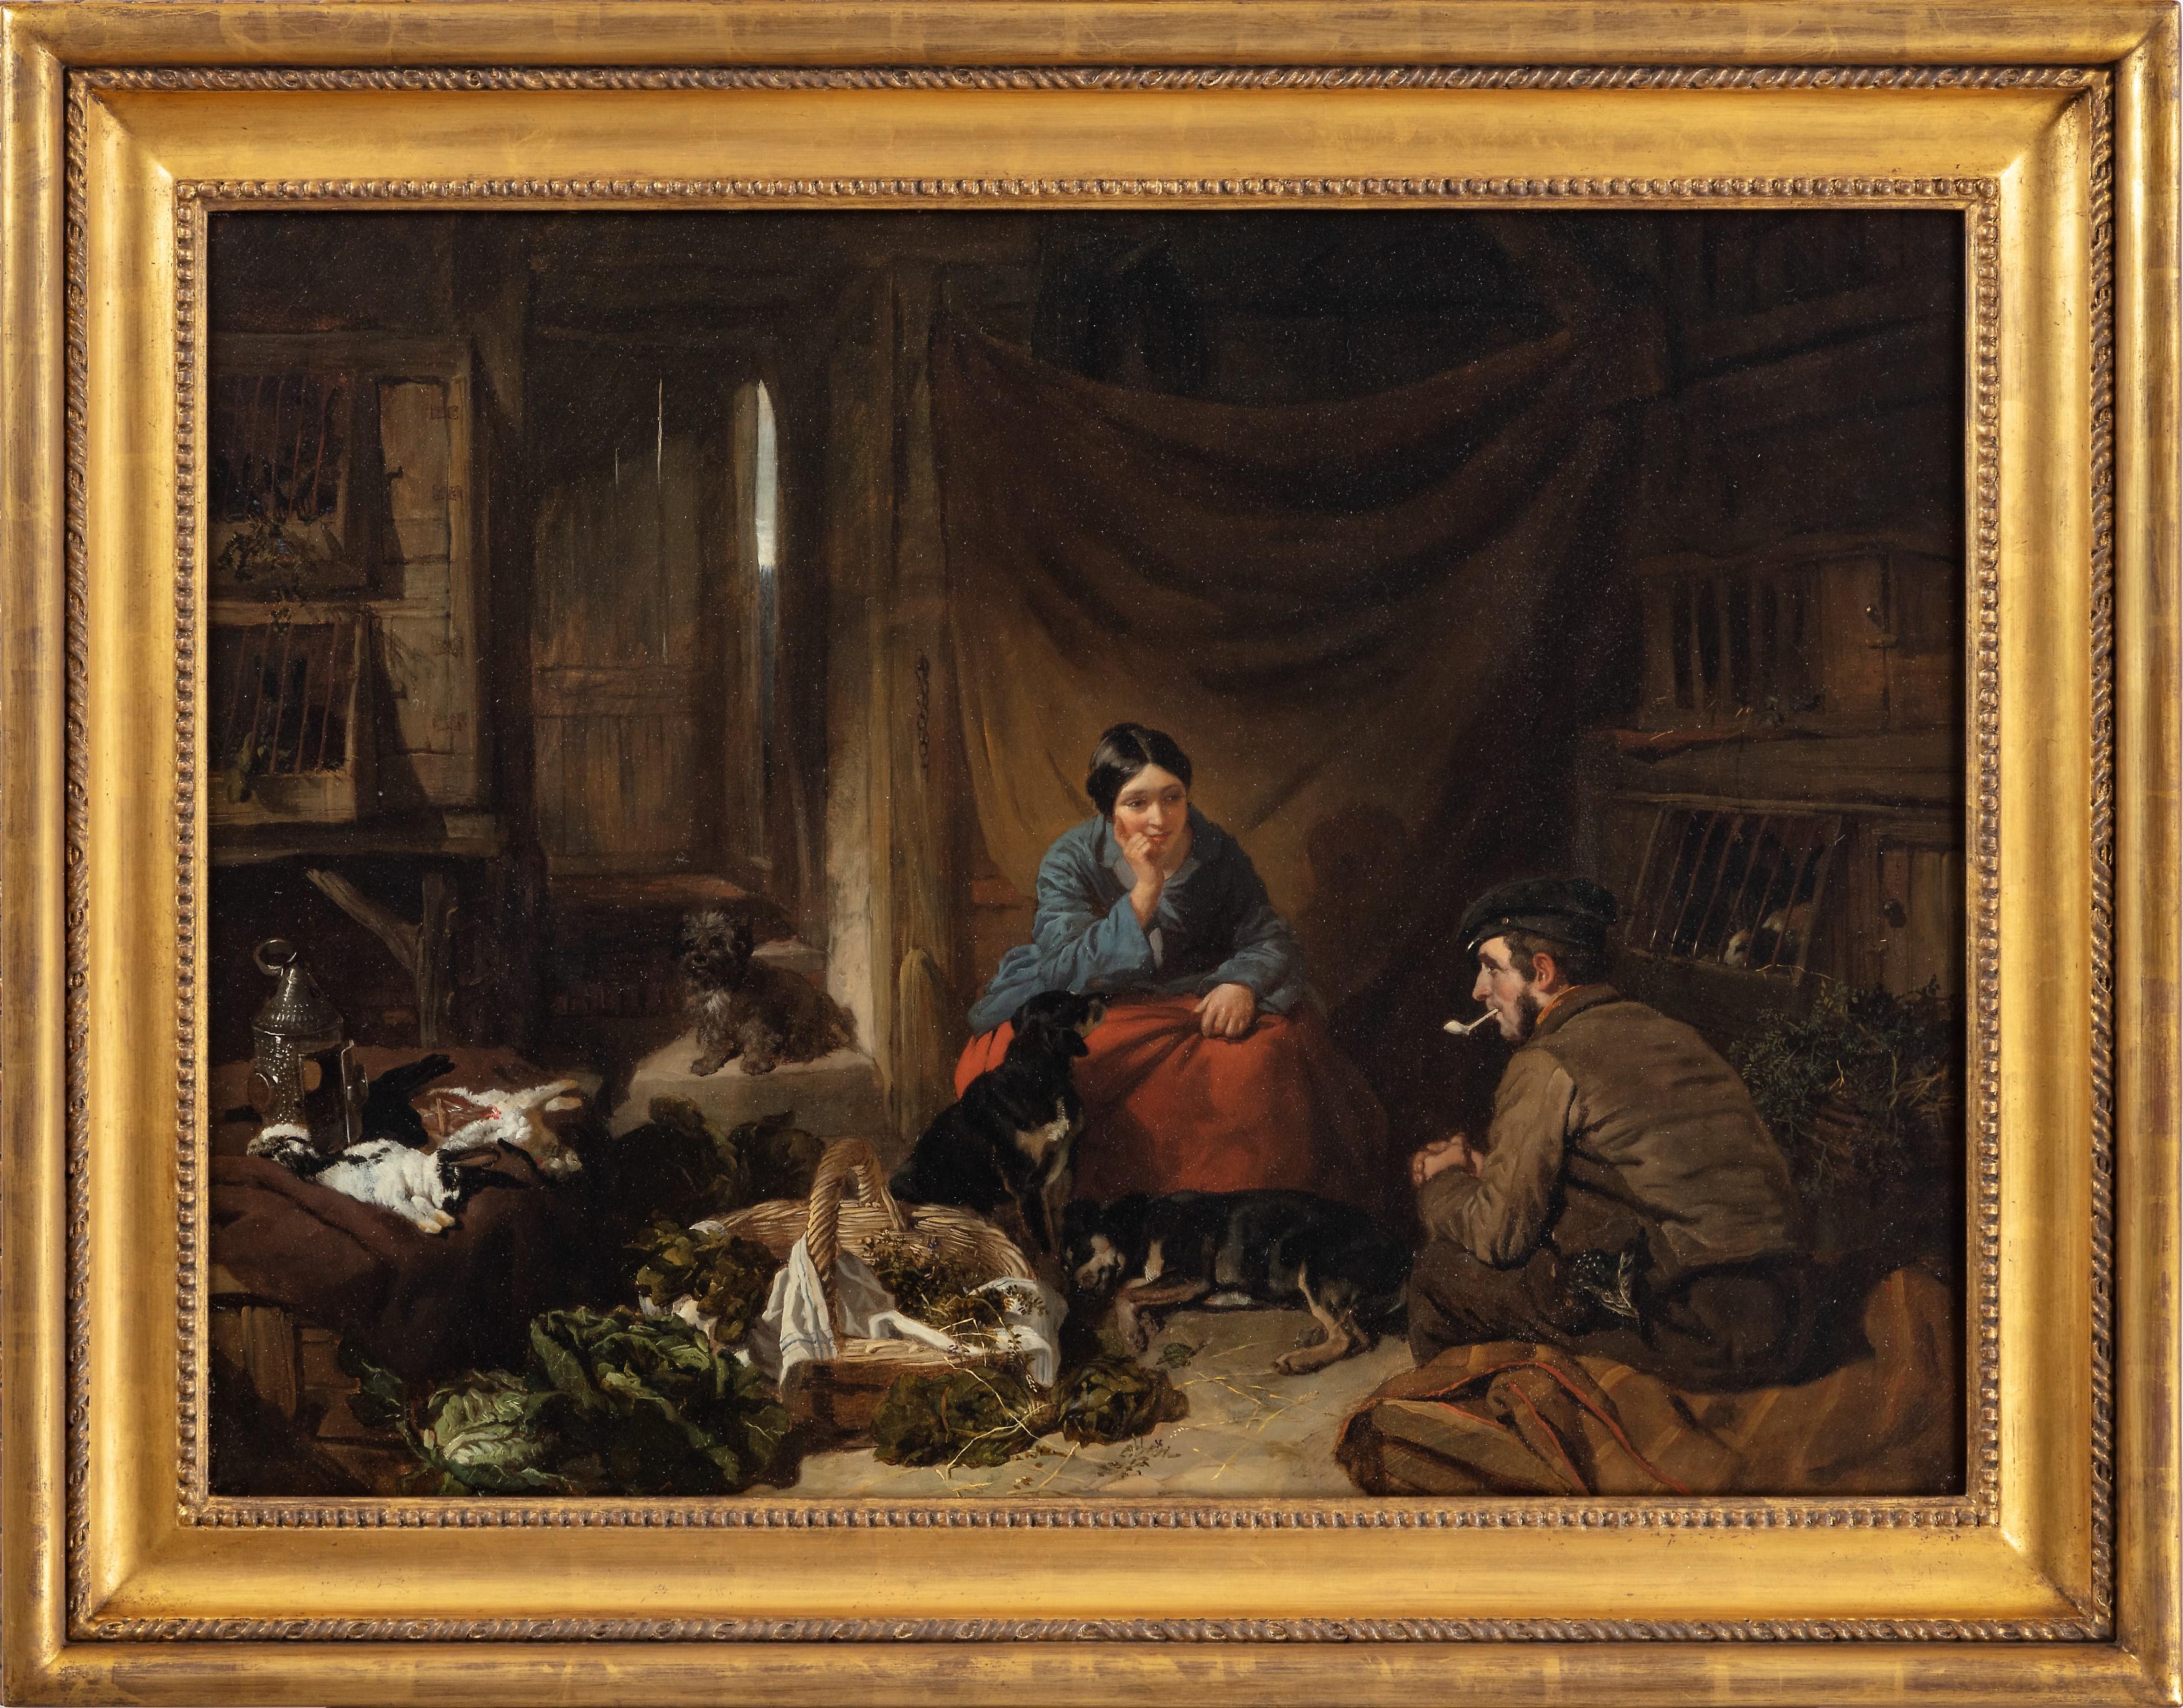 A Victorian cottage interior with figures talking, dogs resting...